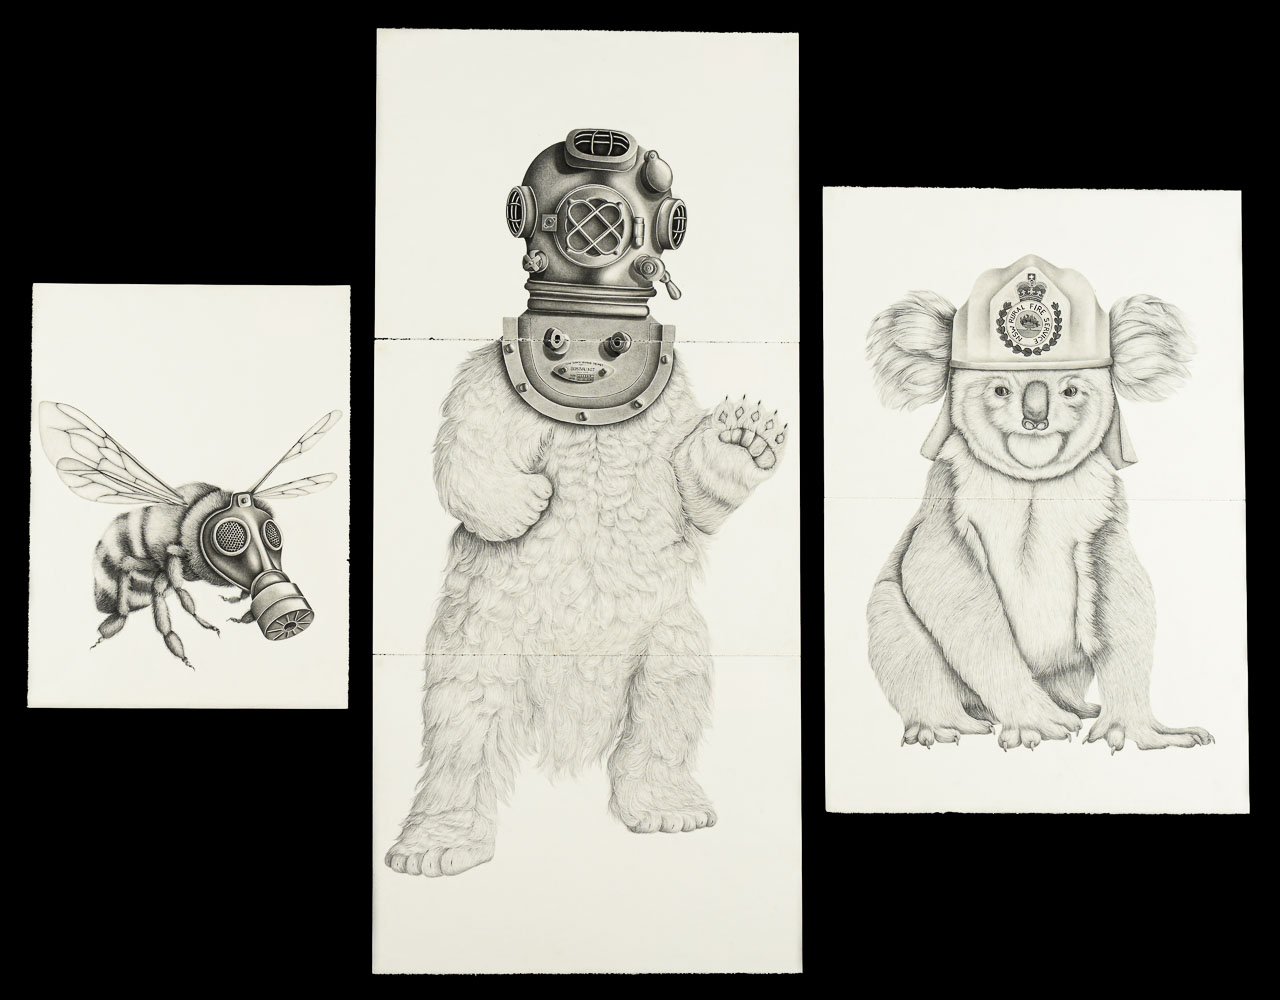 Three graphite pencil drawings of varying sizes. The smallest on the left is of a bee wearing a gas mask, the central drawing is a polar bear wearing an old fashioned divers' helmet, and the drawing on the right is a koala wearing a fireman's helmet.